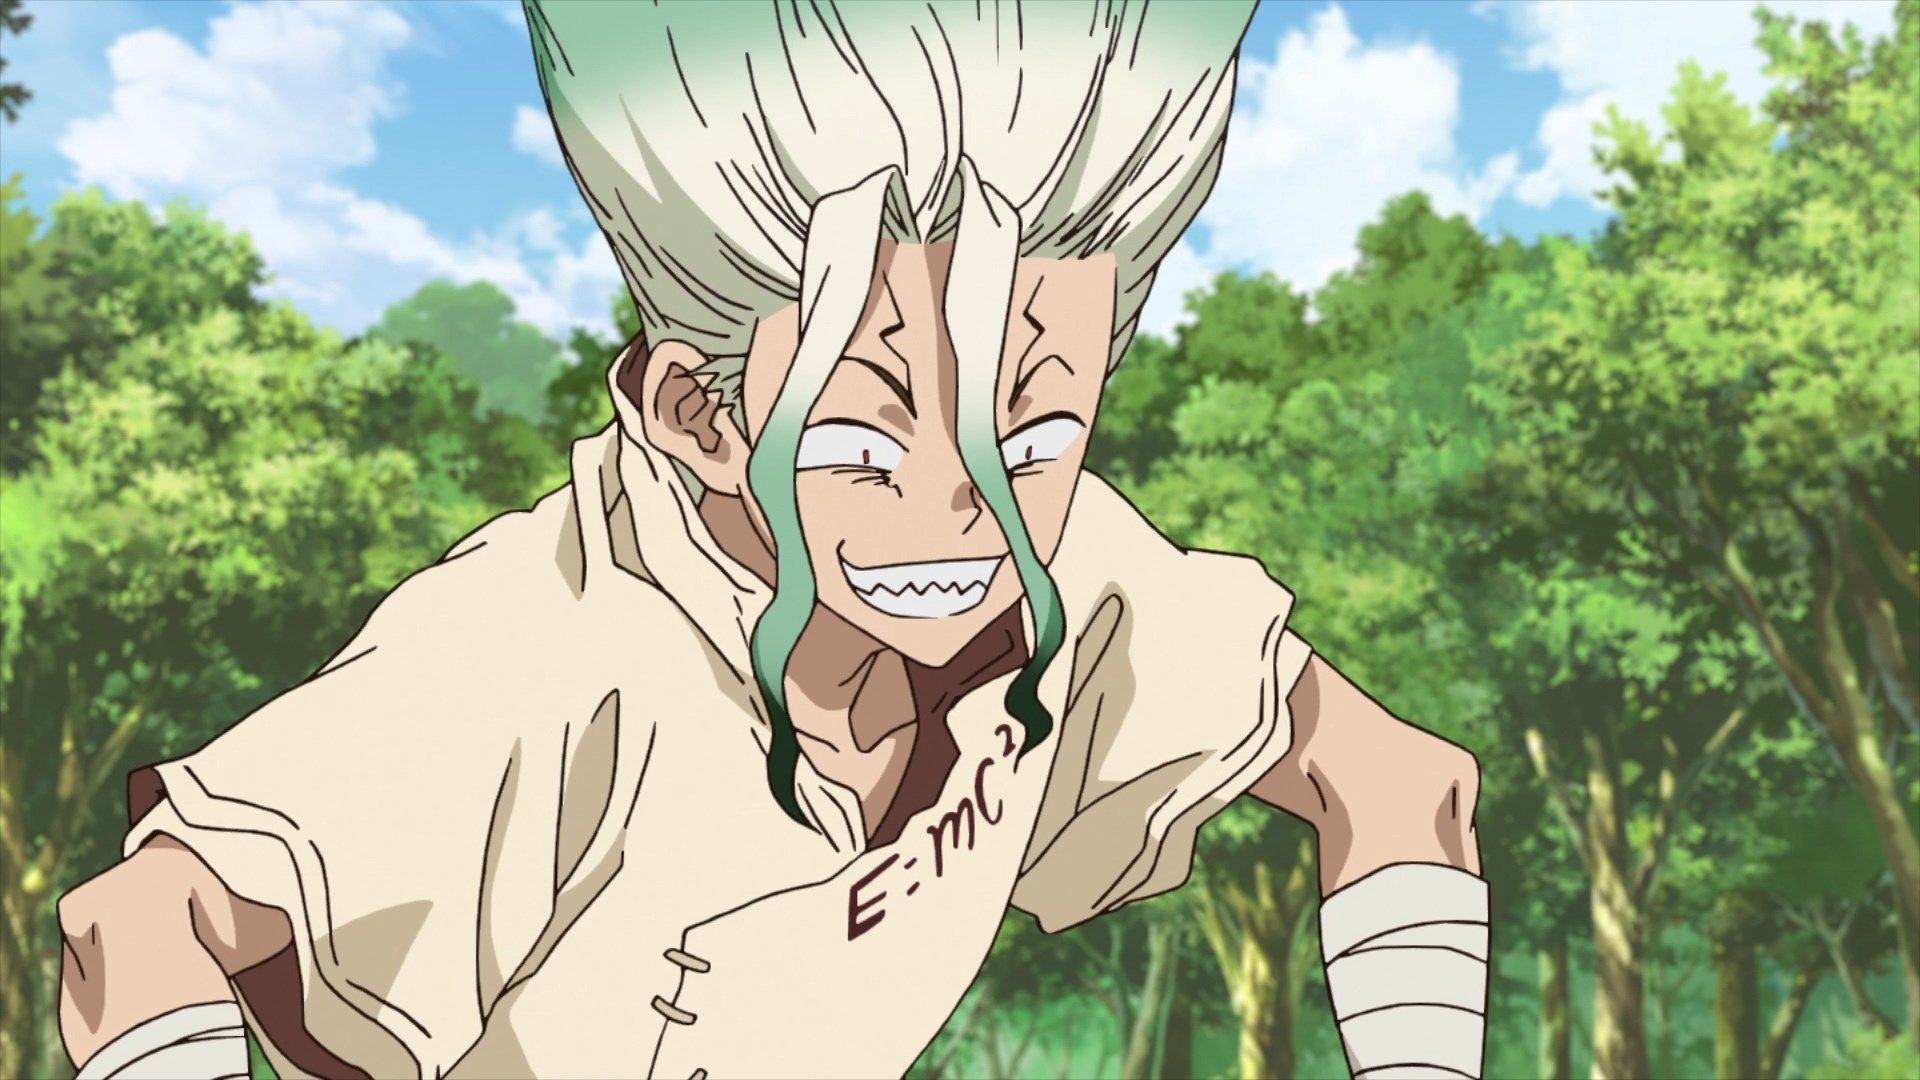 Dr. Stone 3 discussion